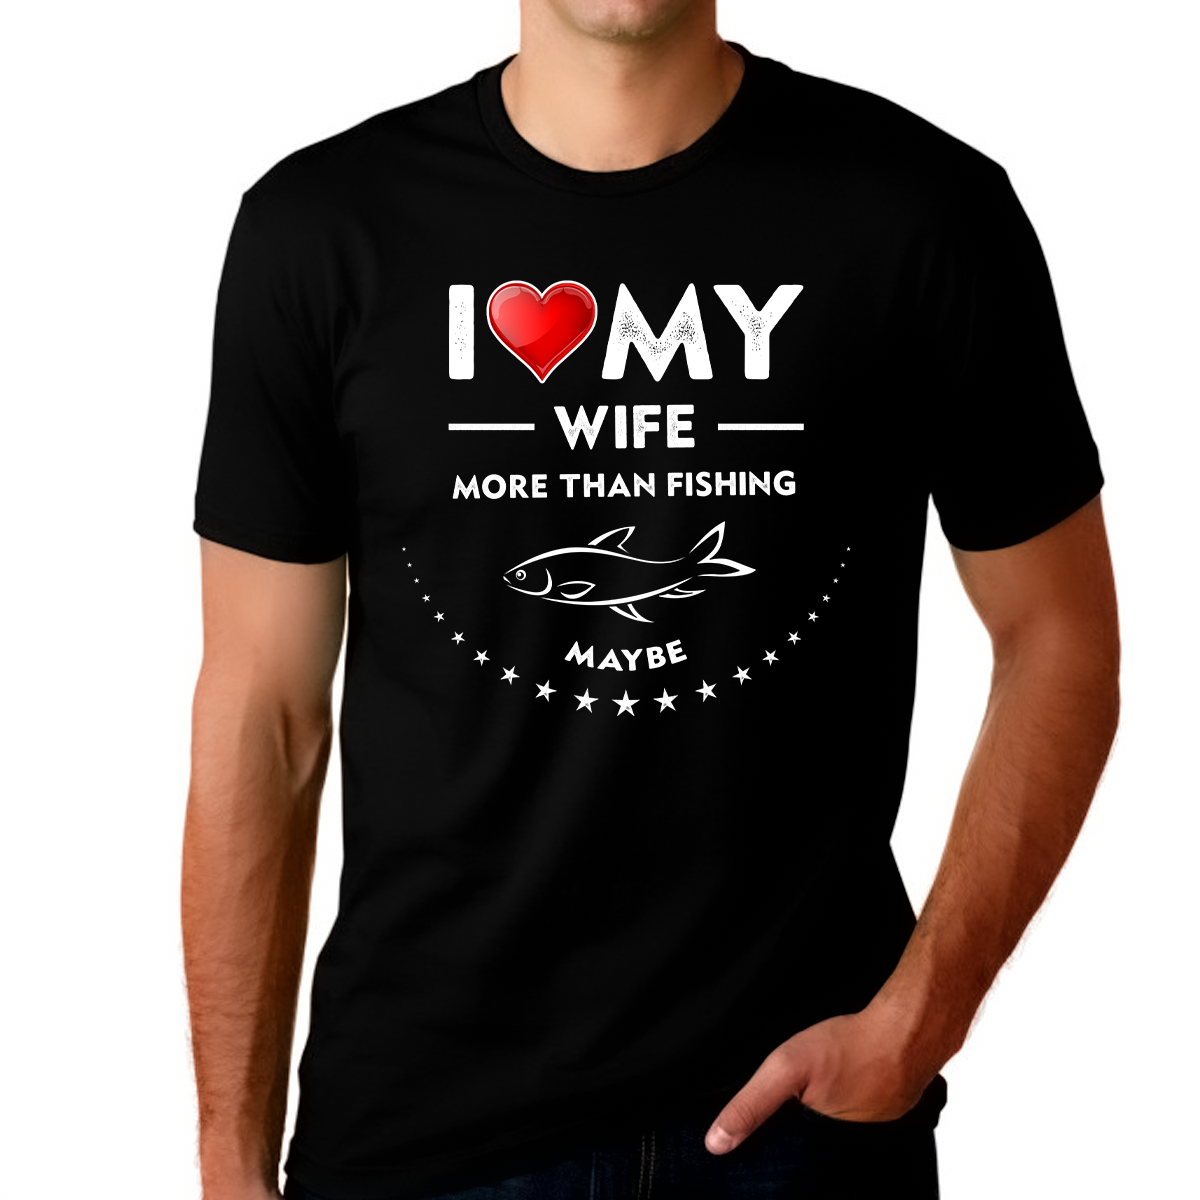 I'm not a trophy wife  Funny fishing tshirt for women - elitefishingoutlet